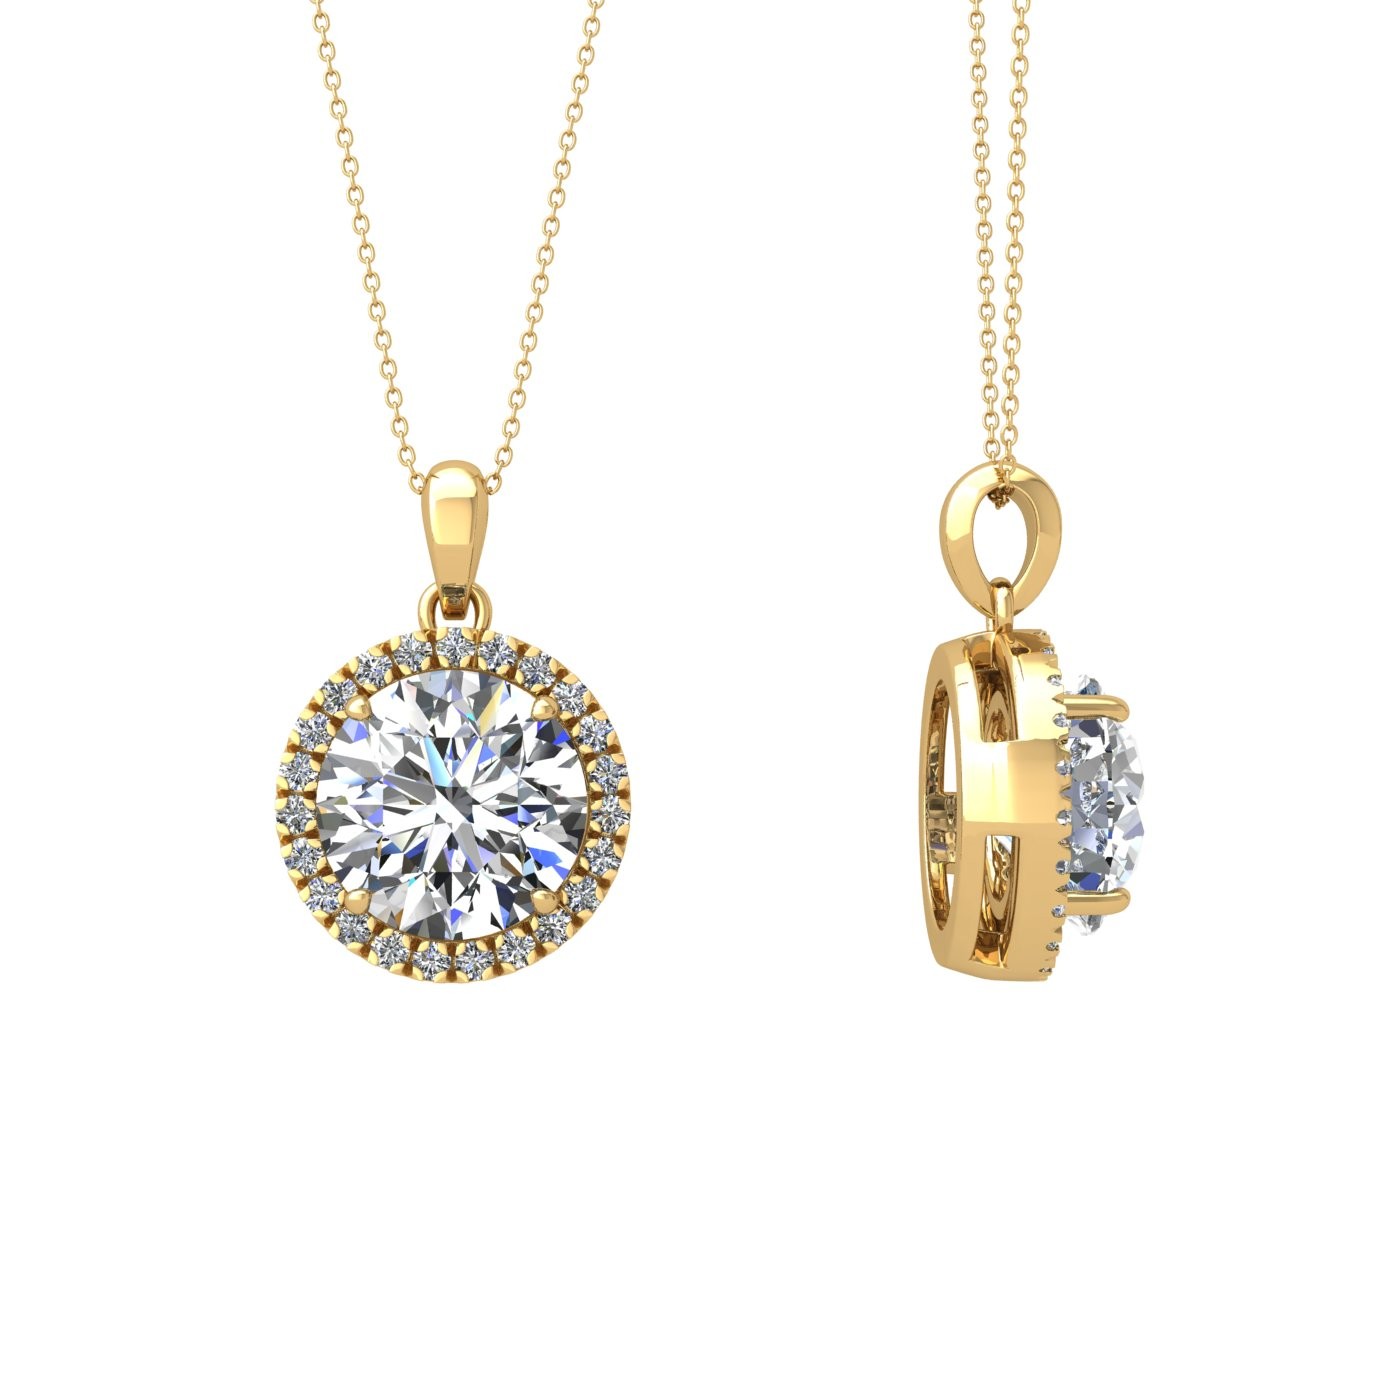 18k yellow gold  0,7 ct 4 prong round shape diamond pendant with diamond pavÉ set halo including chain seperate from the pendant